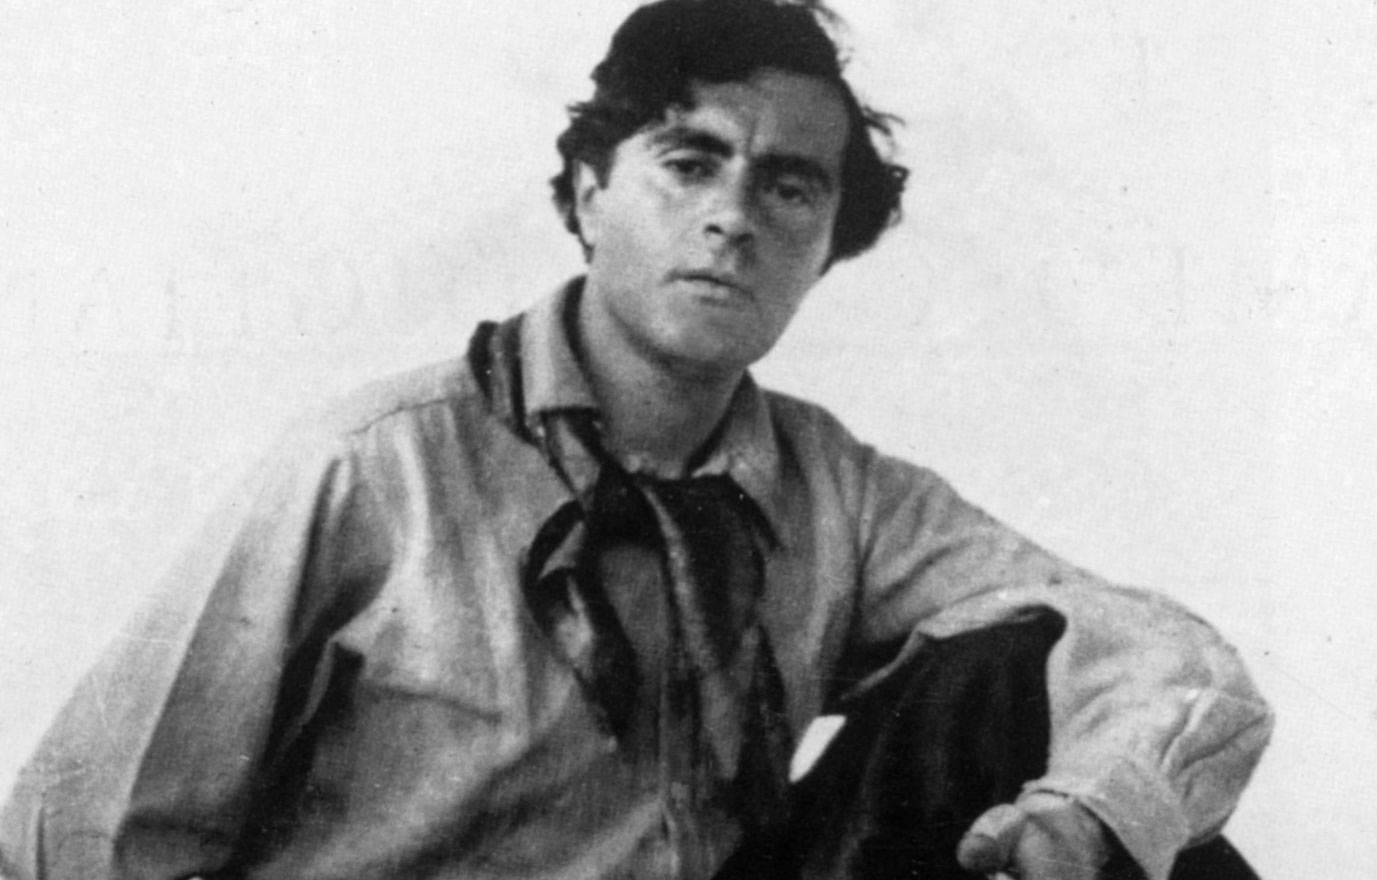 Modigliani Legal Archives seized in Switzerland, the basis for certifying his works